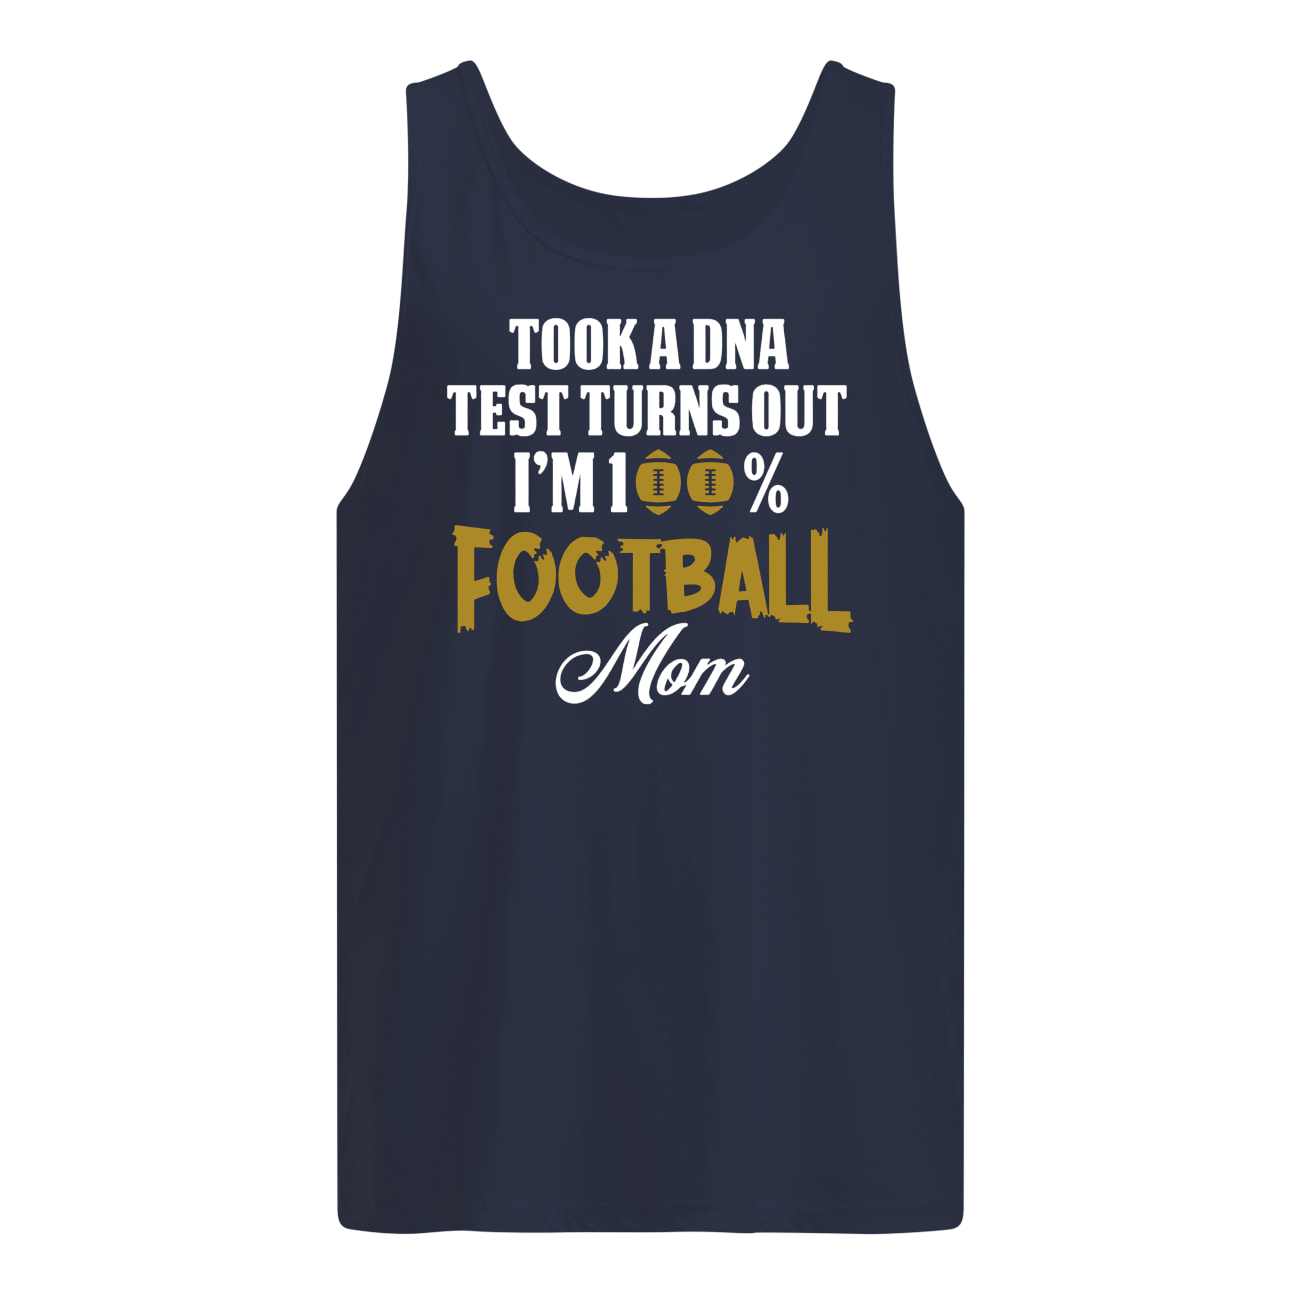 Took a dna test turns out I'm 100% football mom tank top